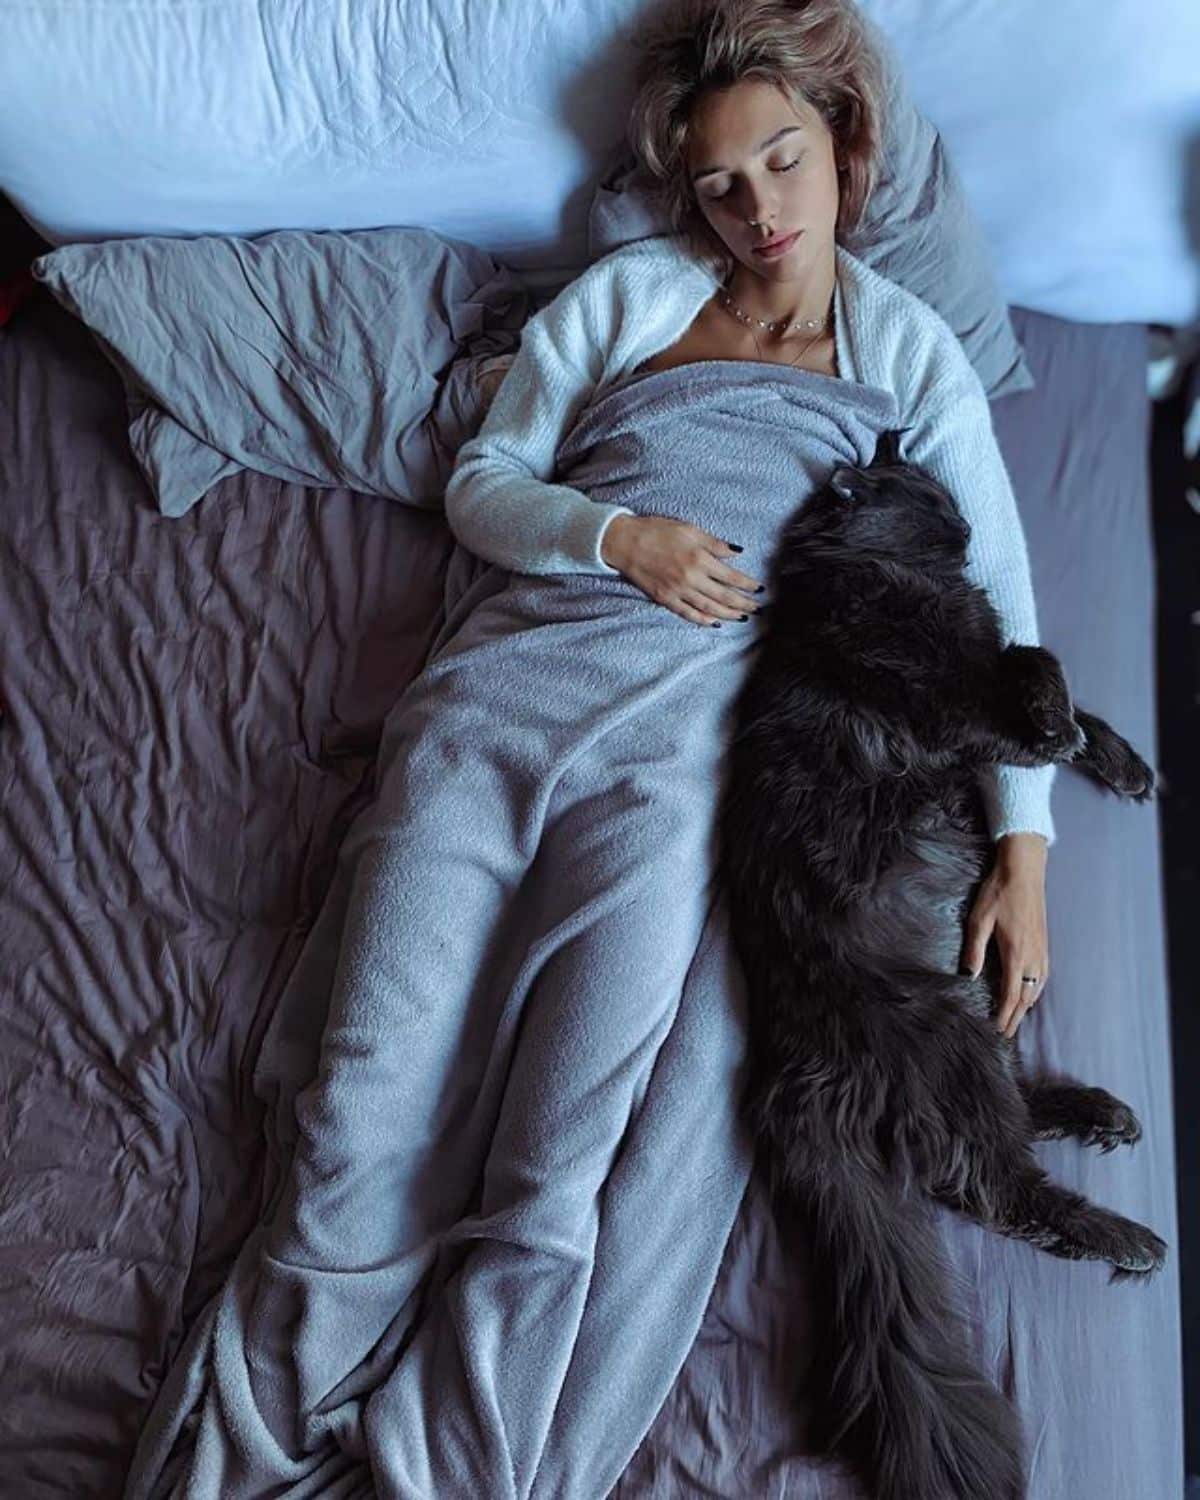 A big black maine coon sleeping next to a young woman.